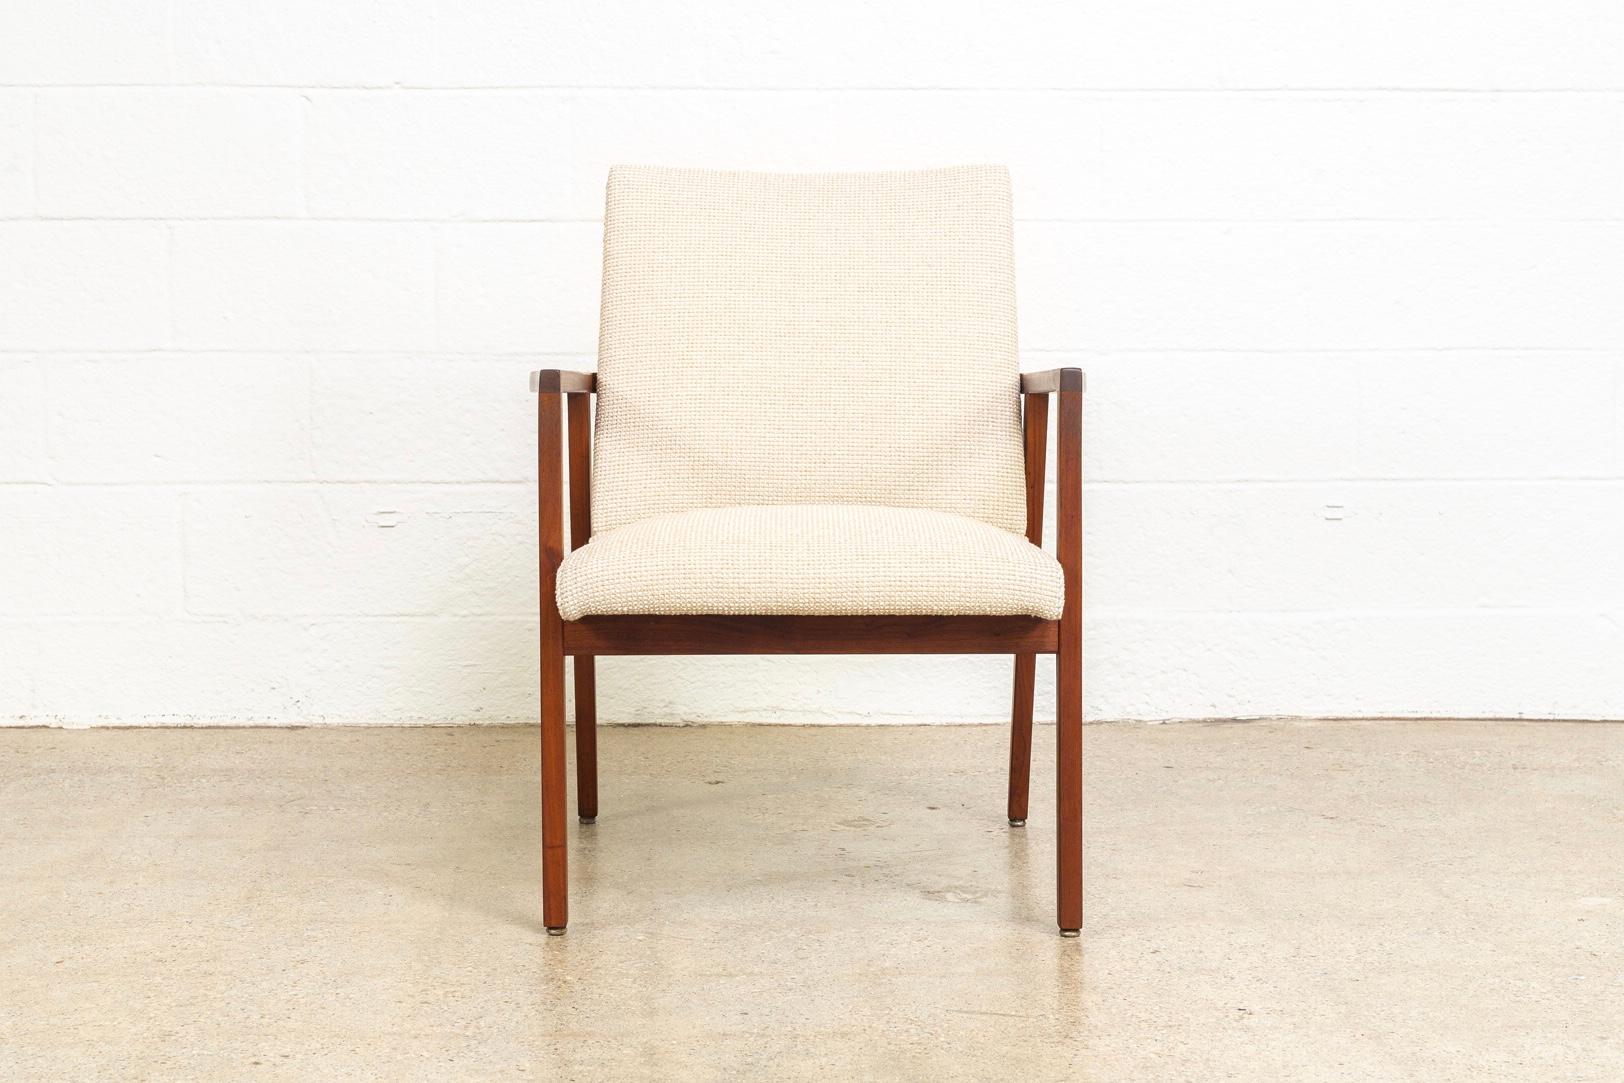 This vintage Mid-Century Modern Jens Risom lounge armchairmanufactured by DoMore Corporation is circa 1960. The Minimalist, Danish modern design features a rich, solid walnut wood angular frame with beautiful sculpted armrests. The chair has been